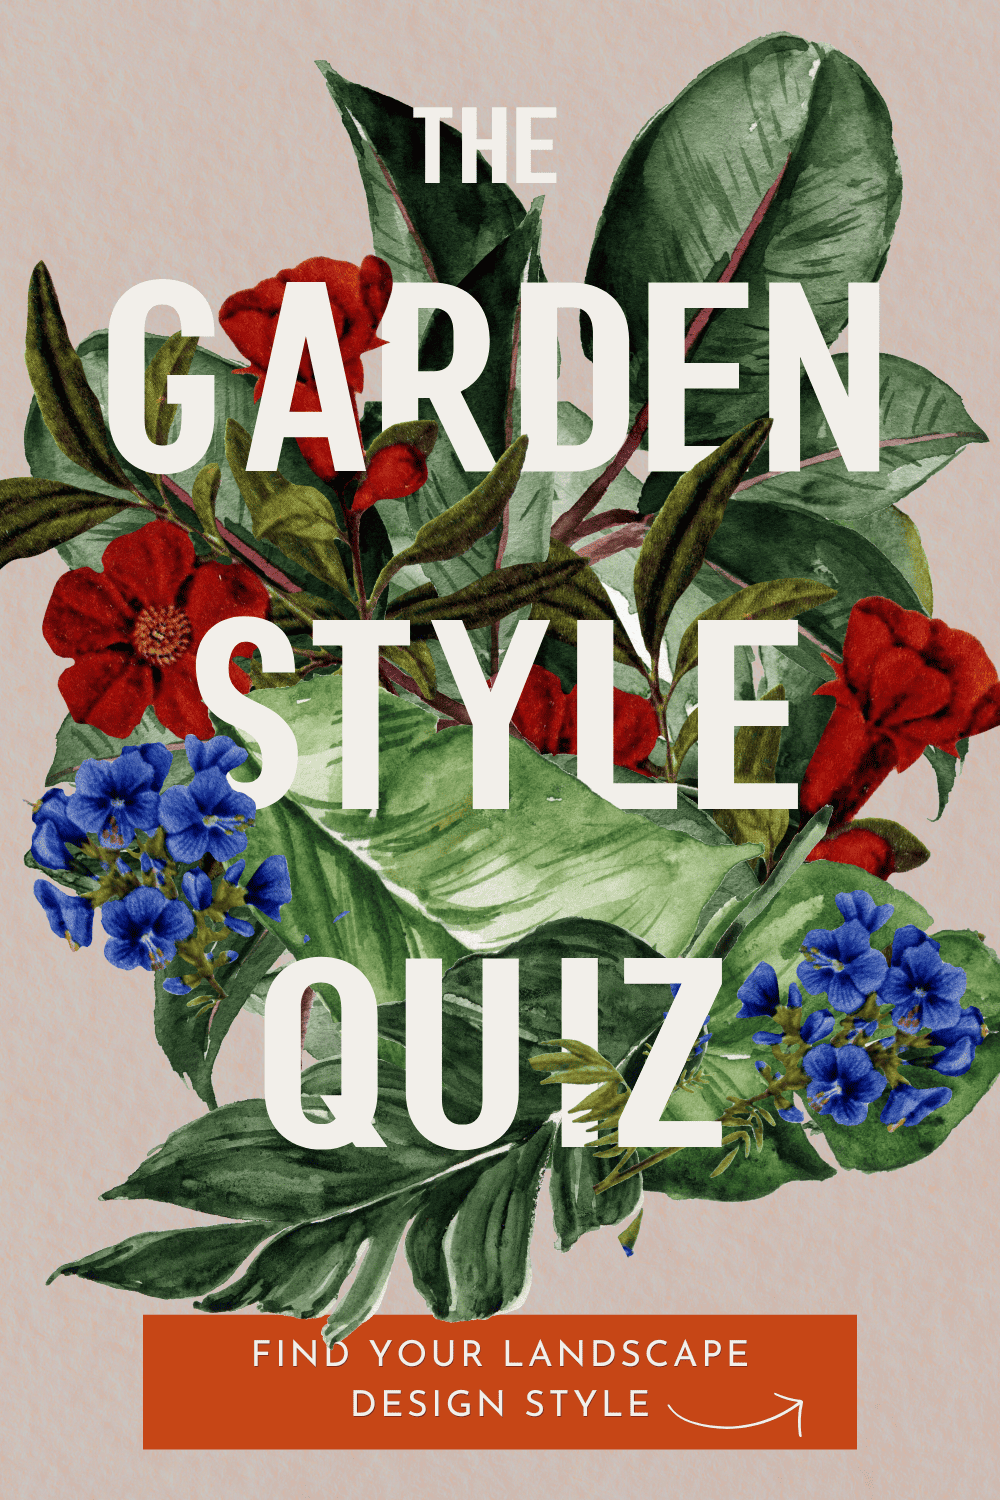 Find your landscape design style with the garden style quiz.